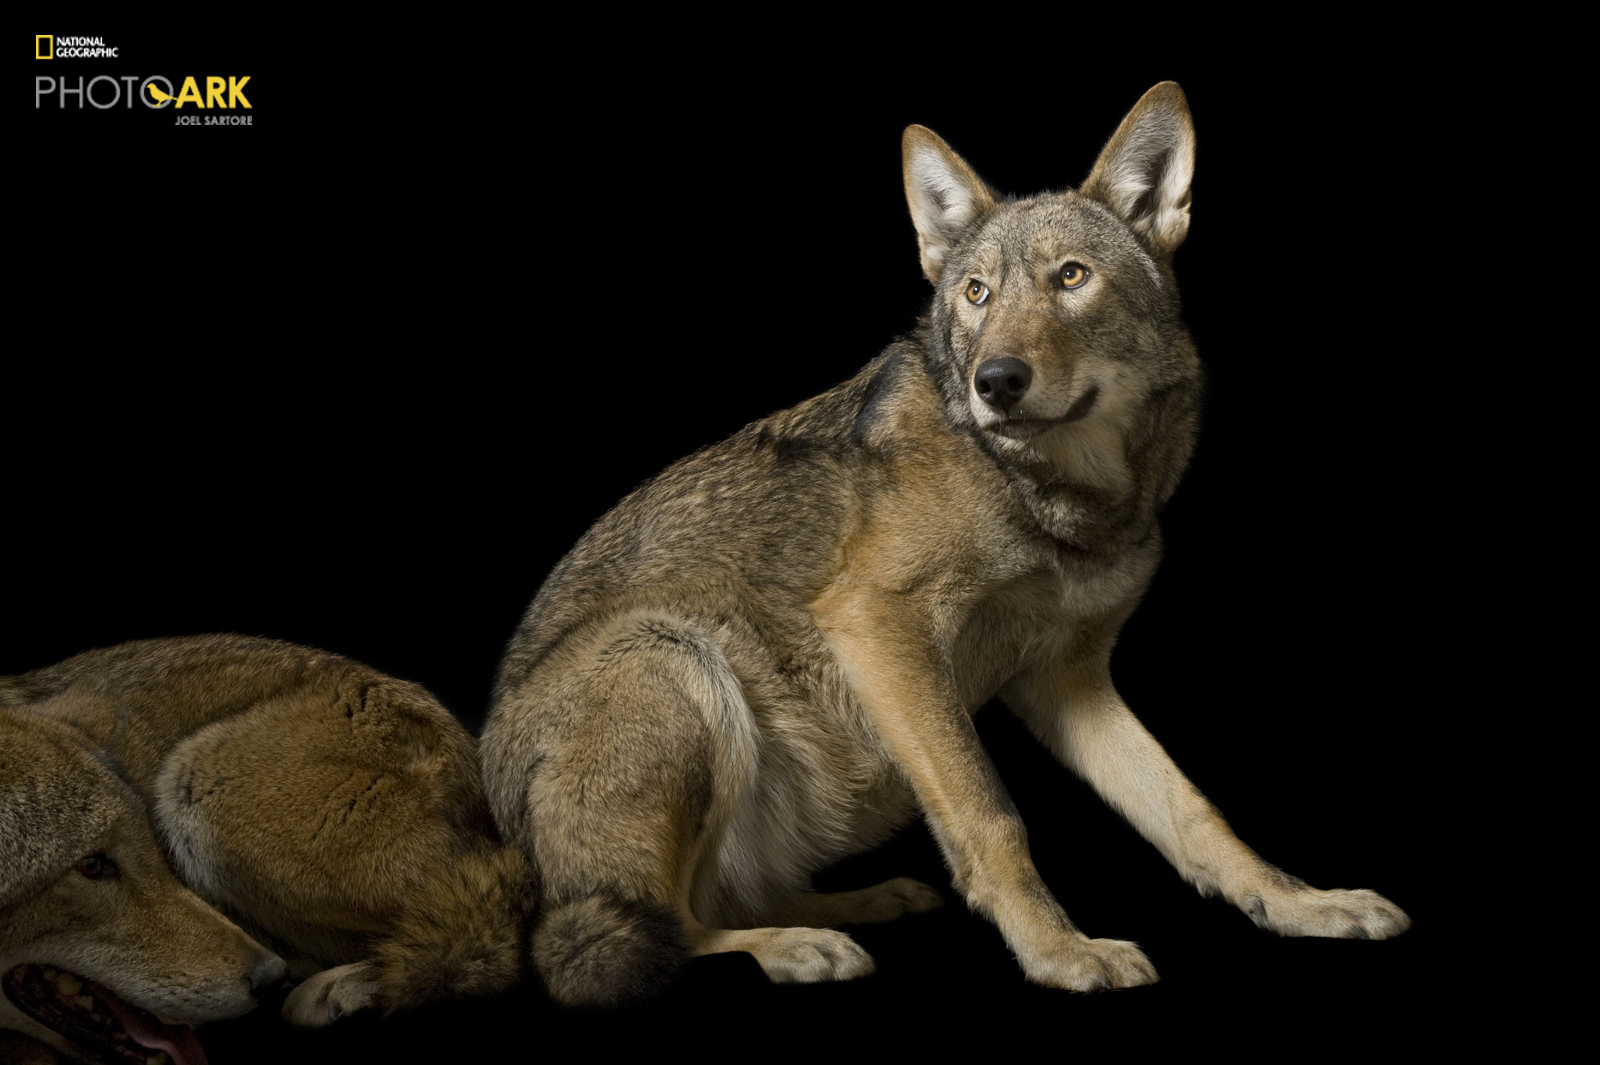 Portrait of red wolves from Joel Sartore's Photo Ark project